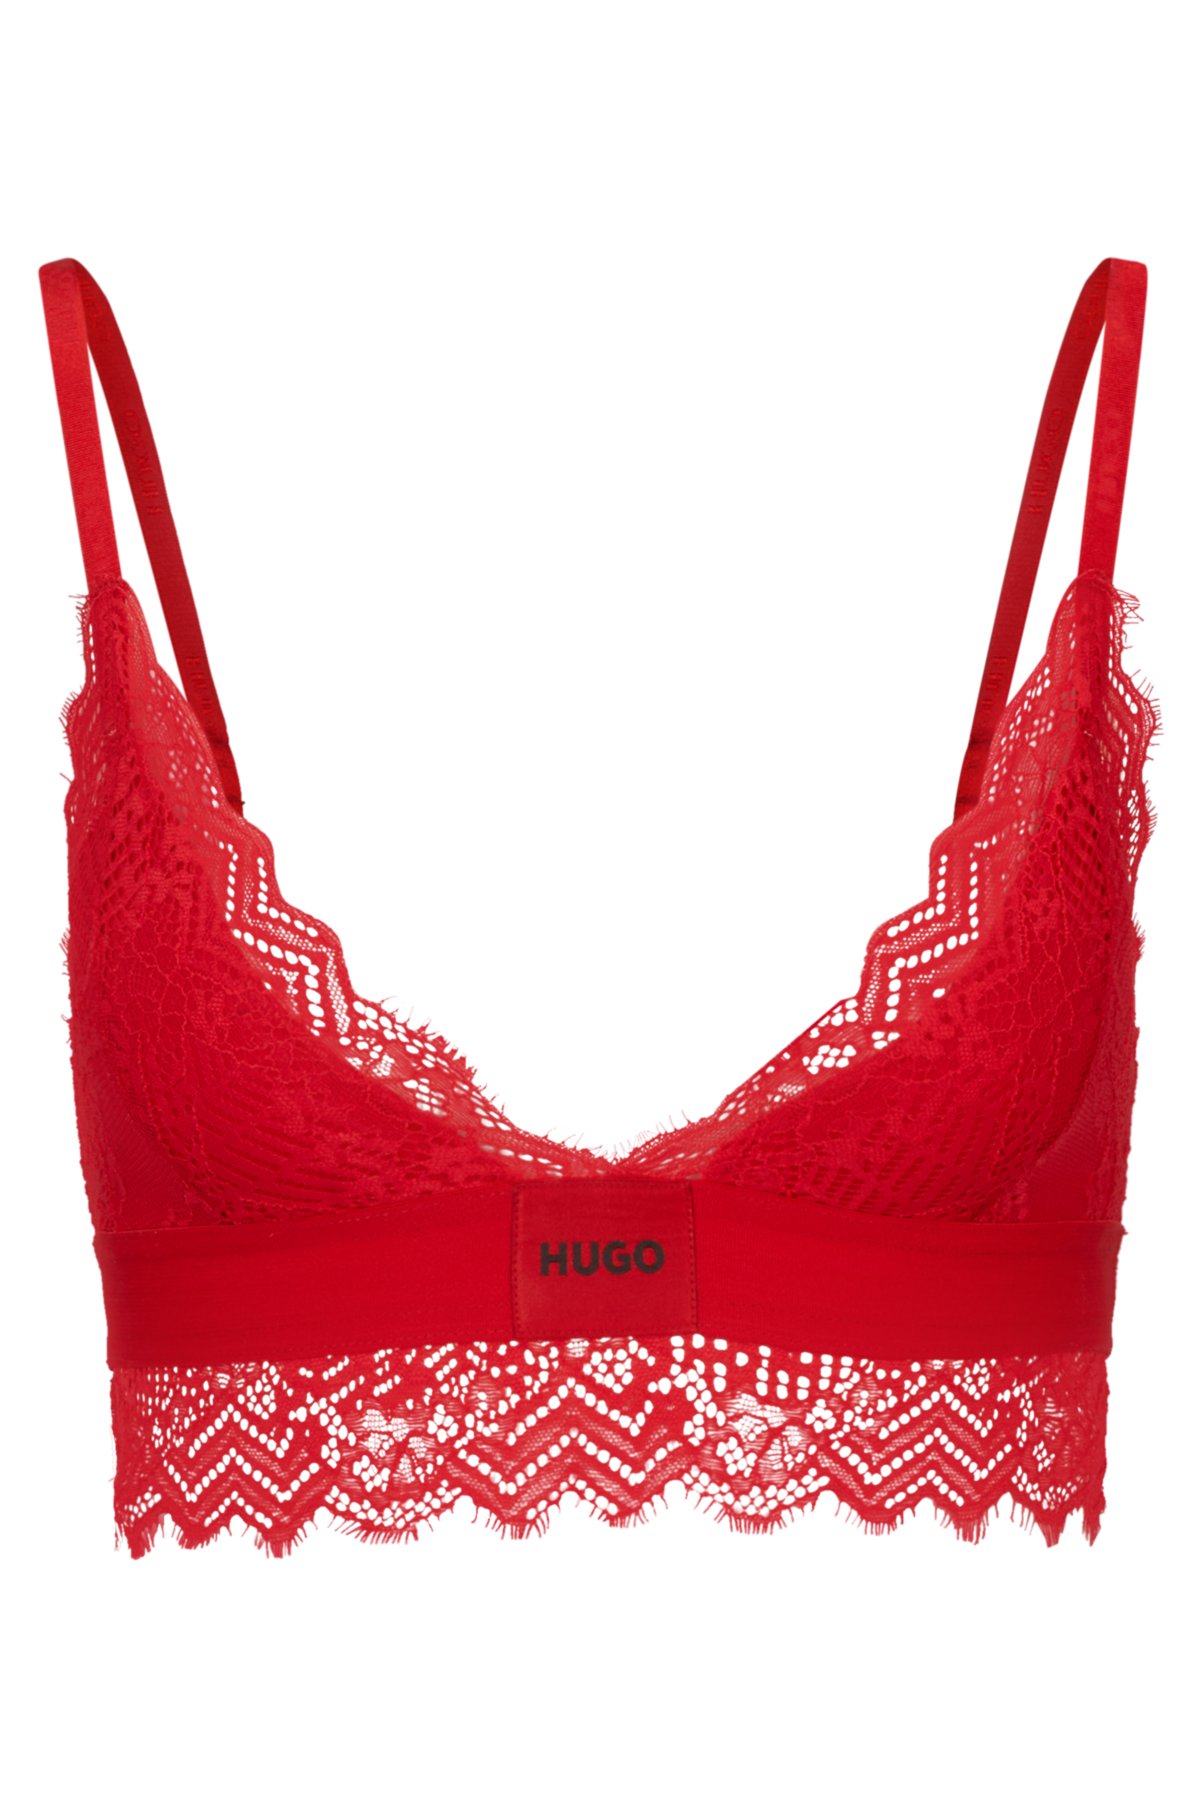 lace - logo HUGO geometric with in triangle bra label Padded